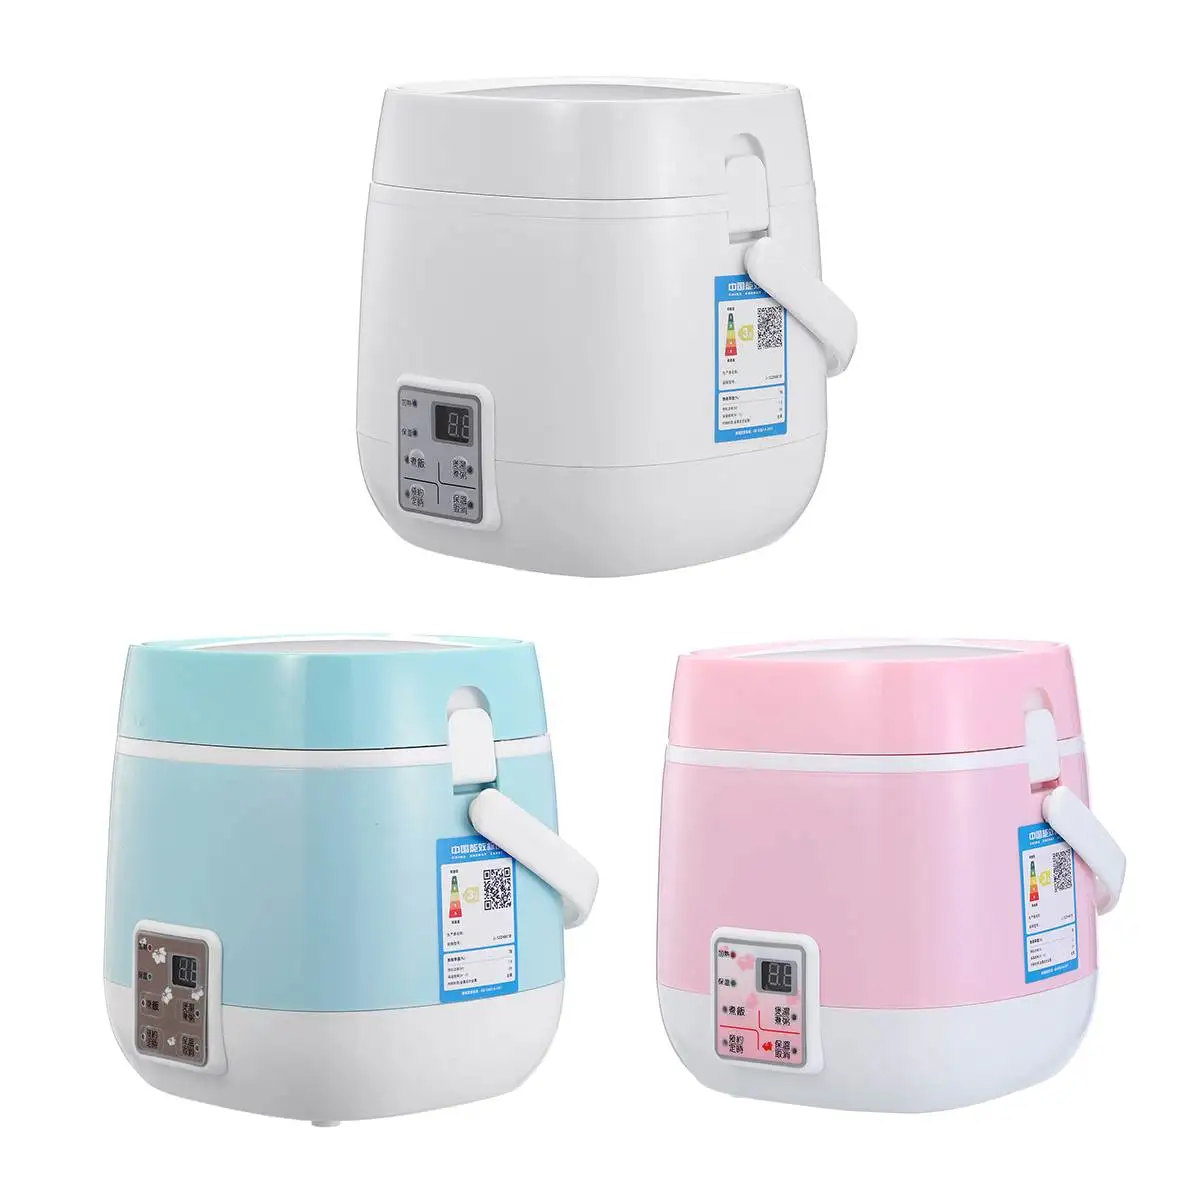 

400W Electric Rice Cooker Food Warmer Non-Stick Household Cooking Machine with 24 Hours Smart Appointment 1.5L for 1-3 People